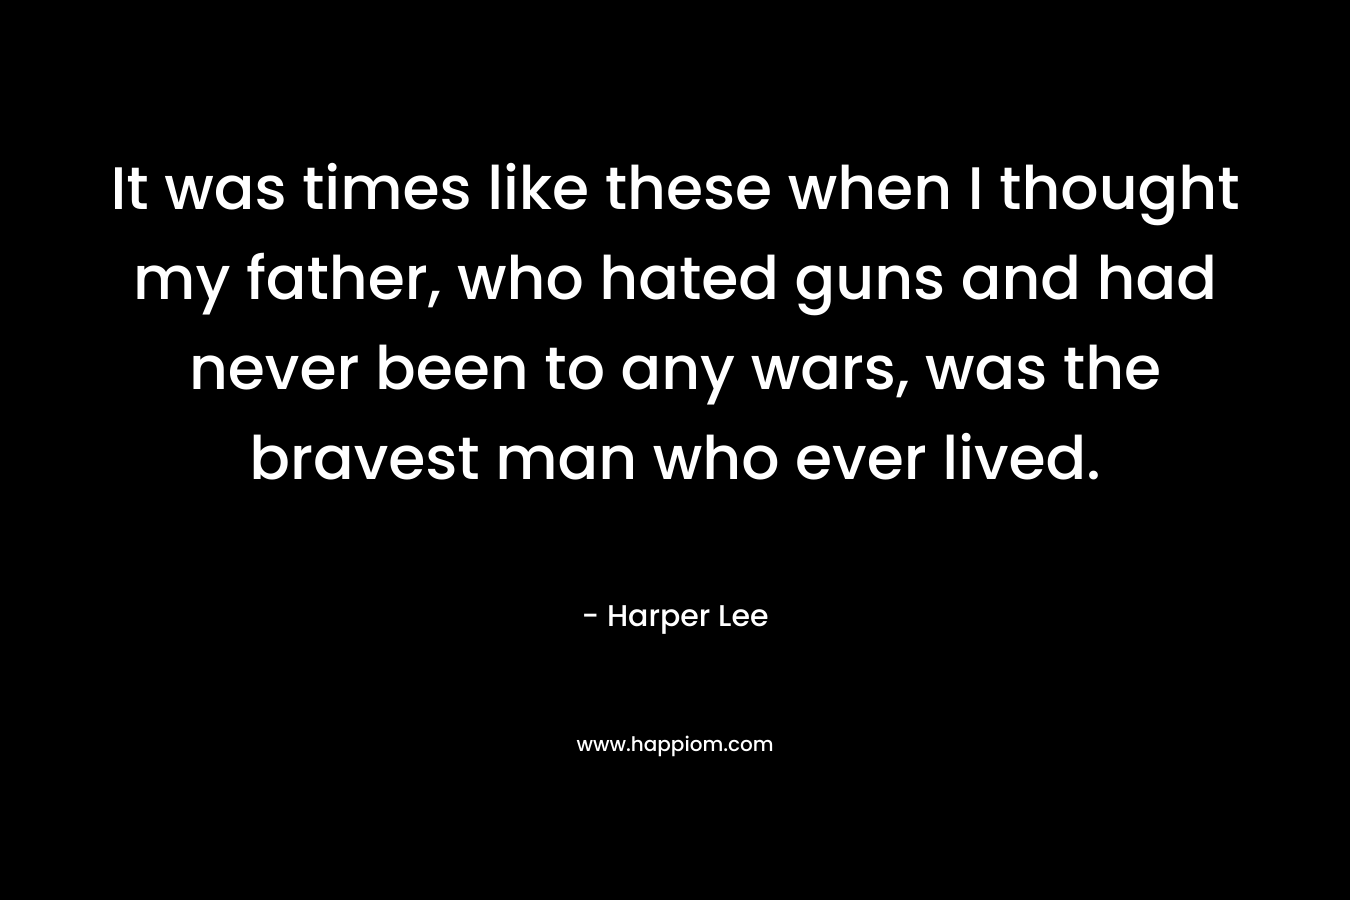 It was times like these when I thought my father, who hated guns and had never been to any wars, was the bravest man who ever lived.